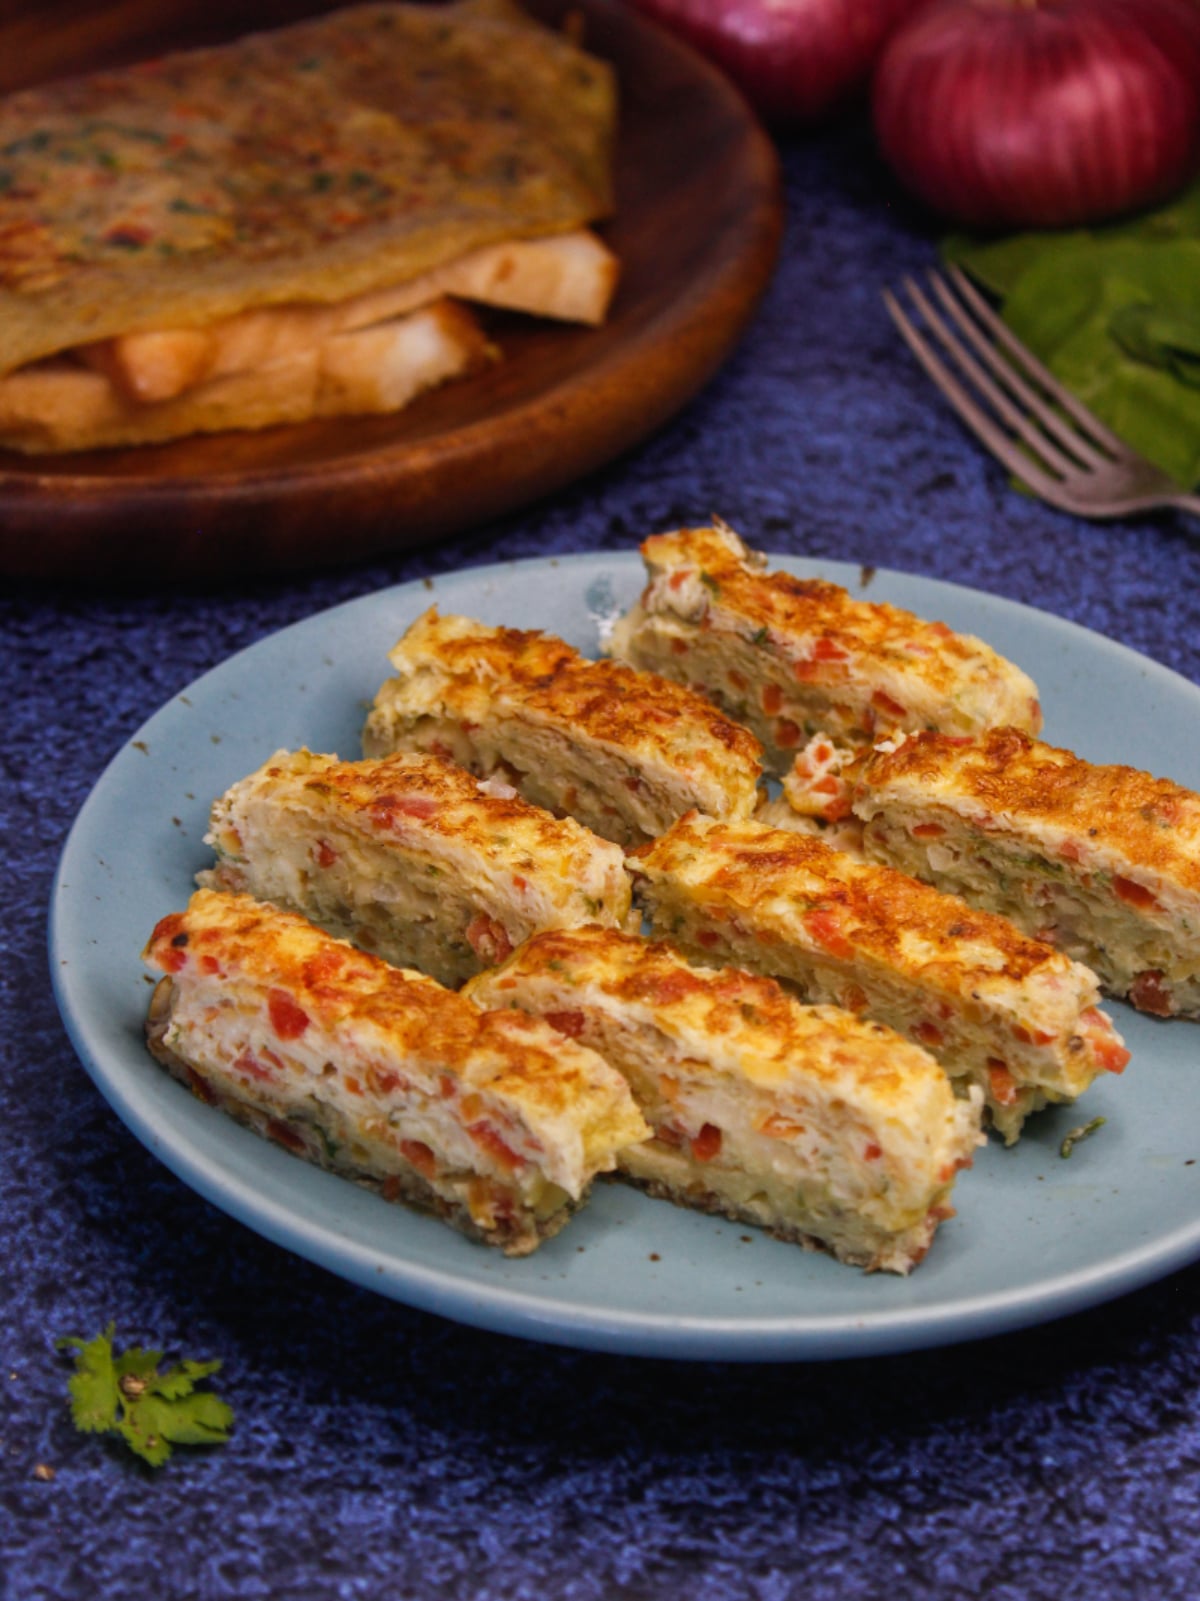 Cheesy Egg Roll served hot on a plate with some bread slices